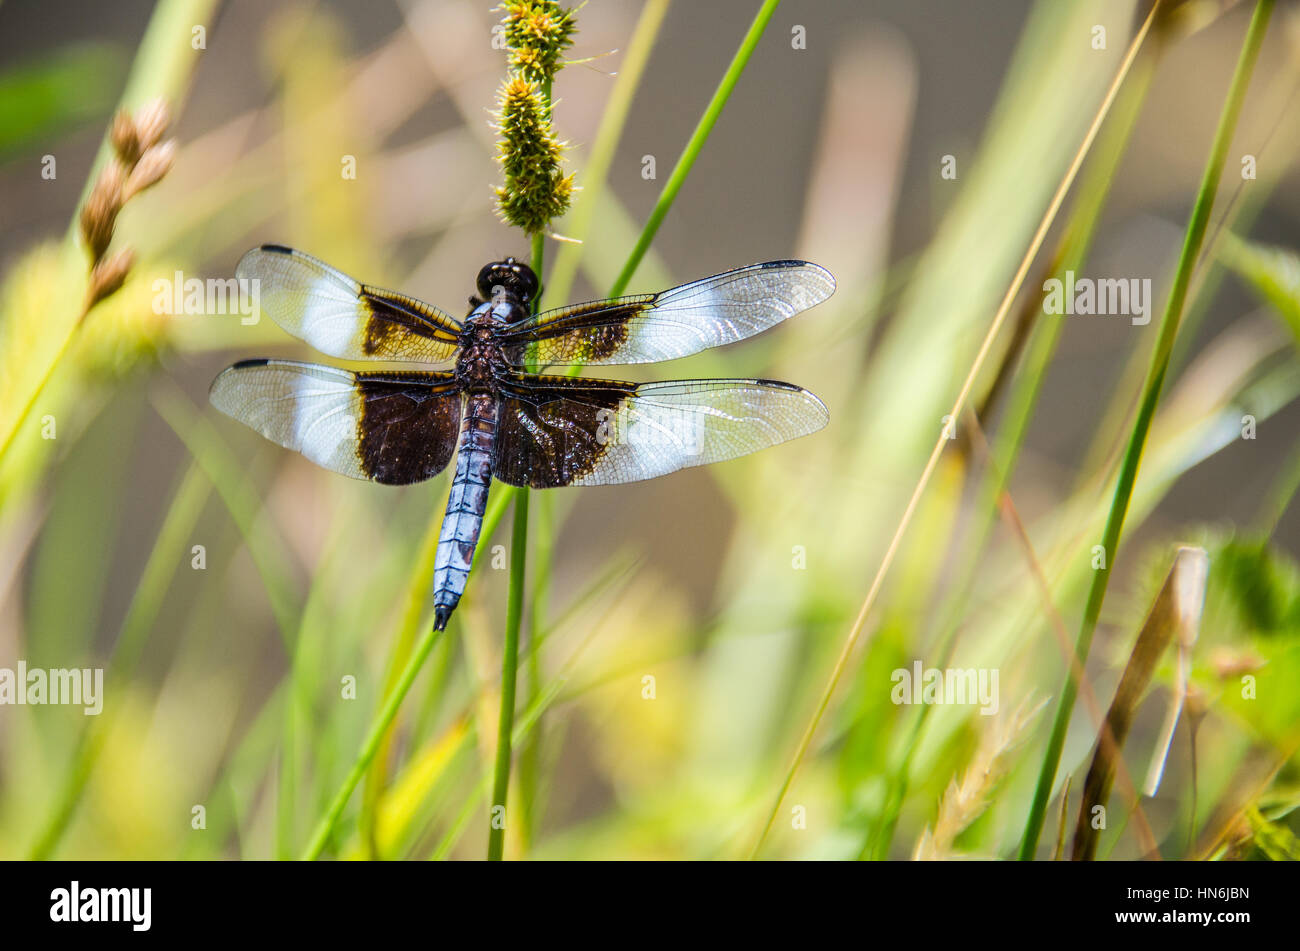 Closeup of a beautiful, blue dragonfly in a lotus pond with timothy grass Stock Photo